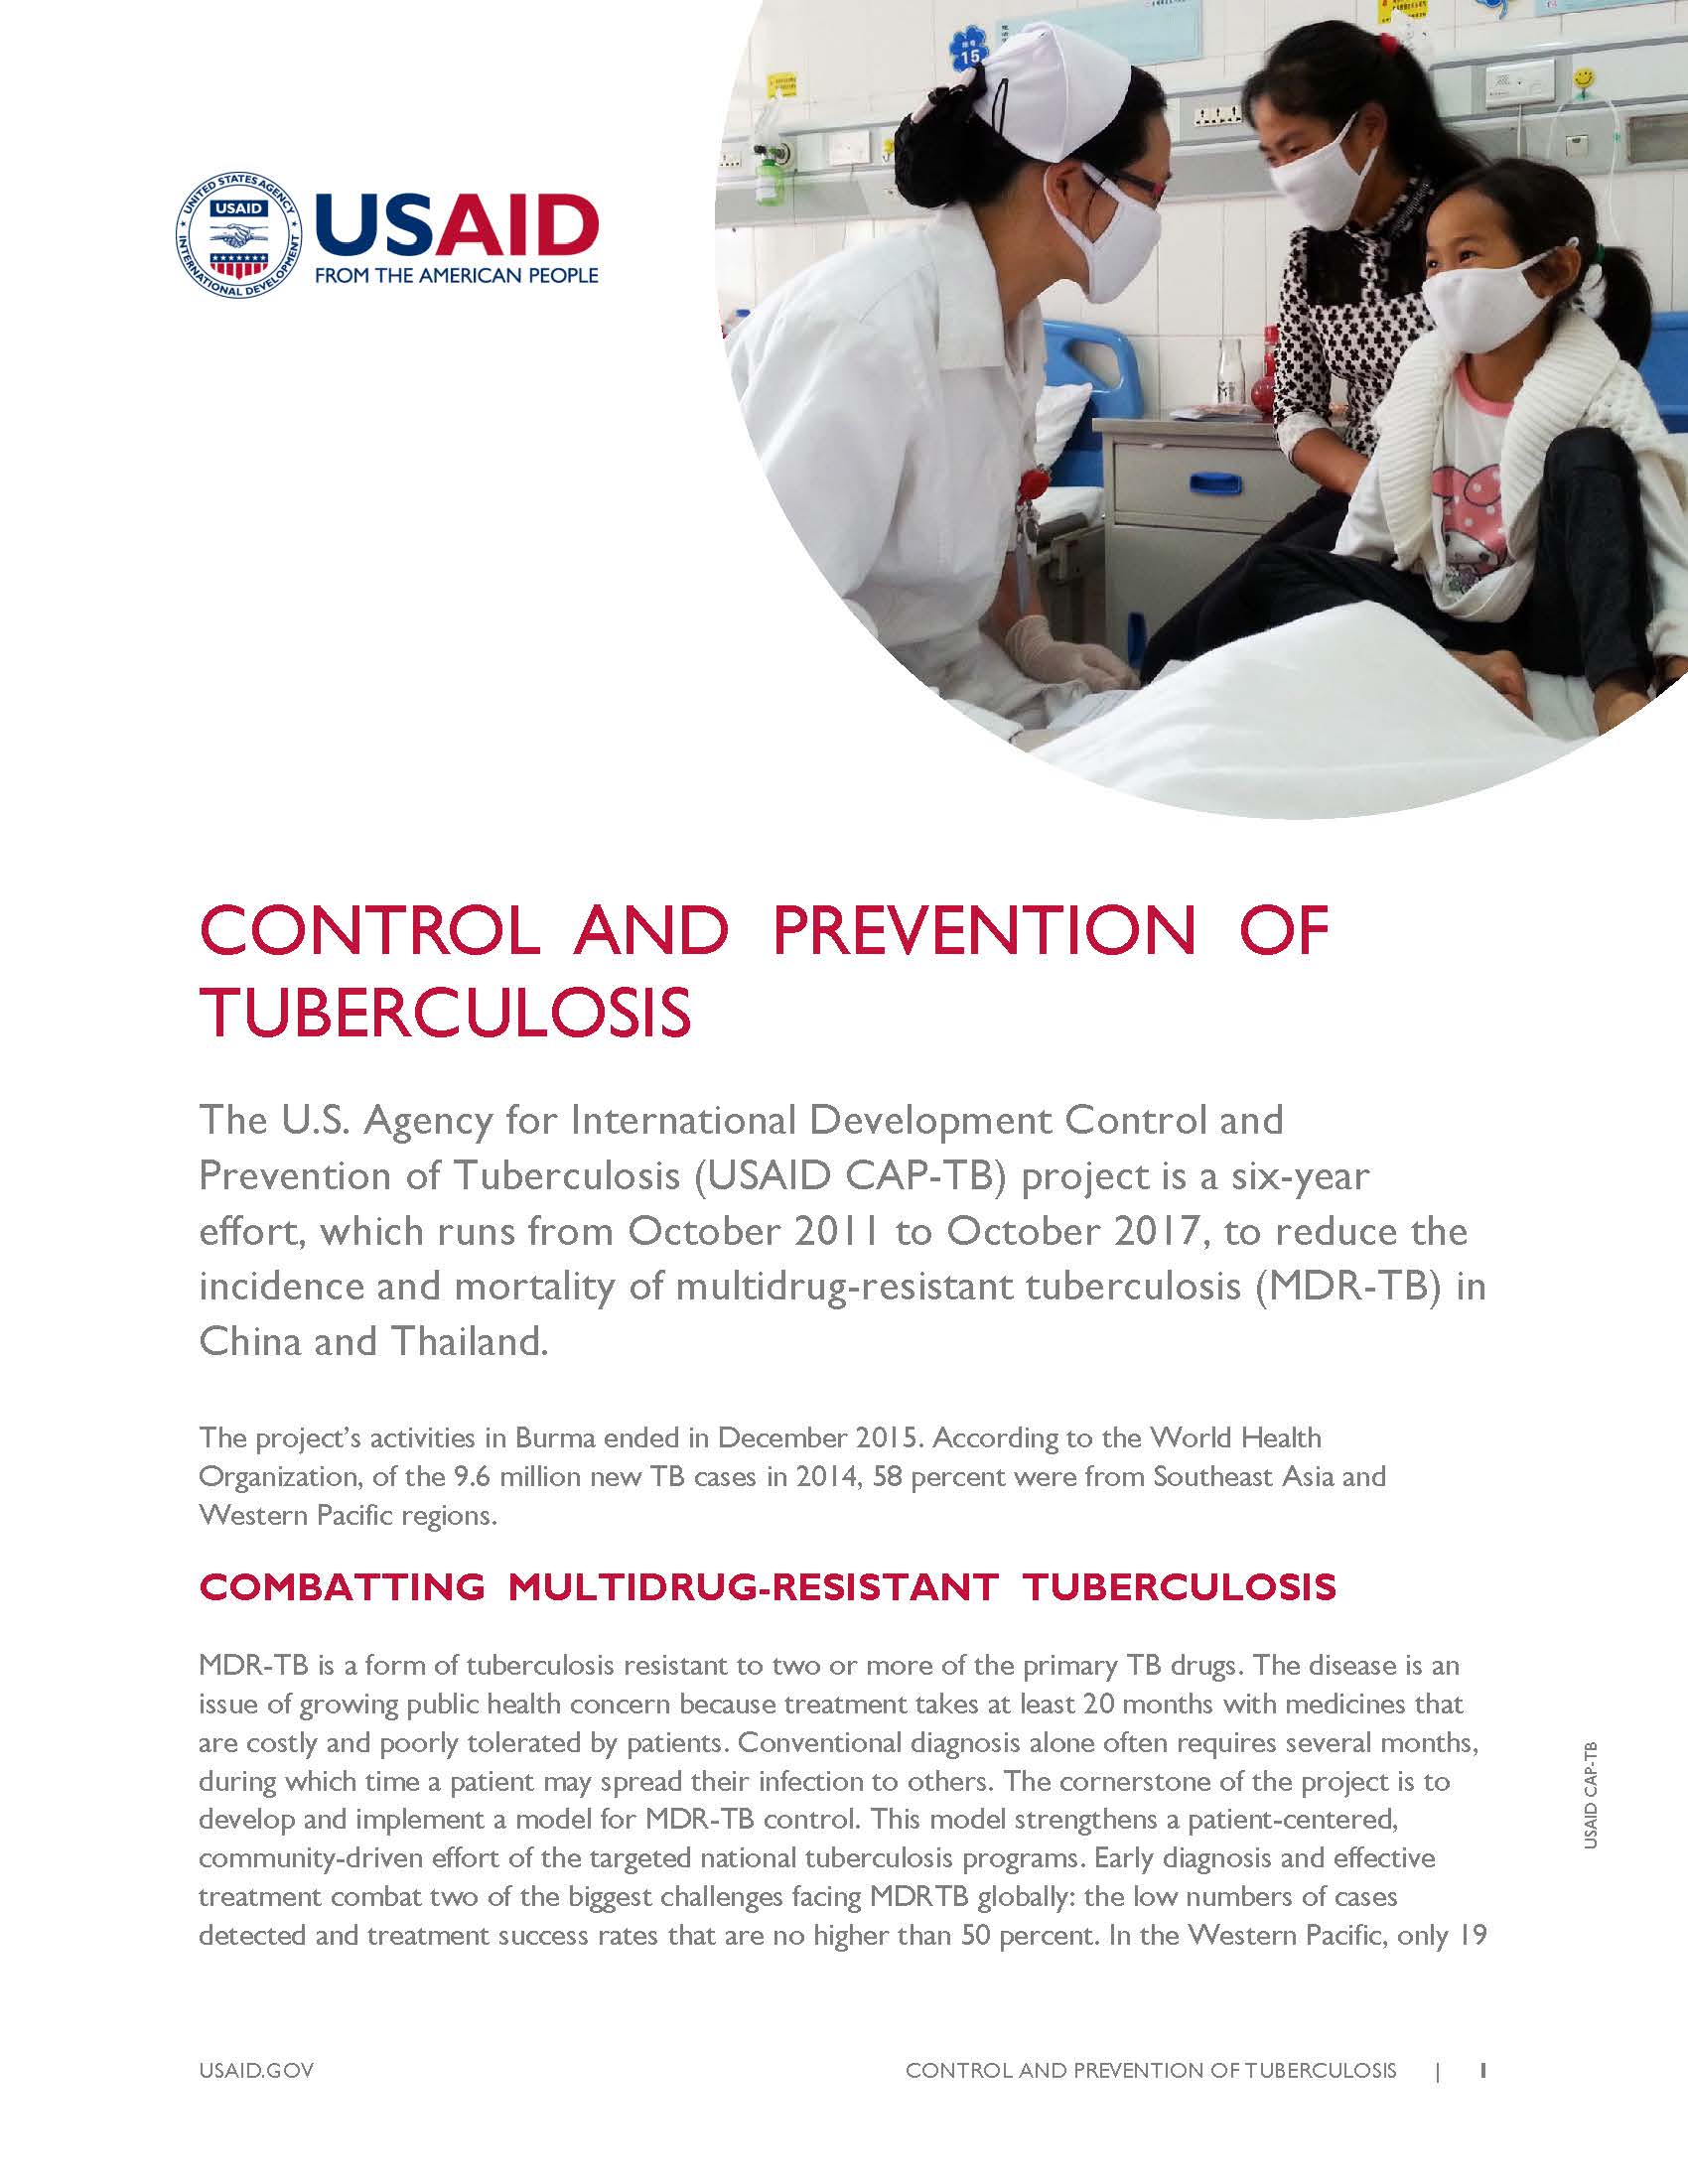 Control and Prevention of Tuberculosis Project